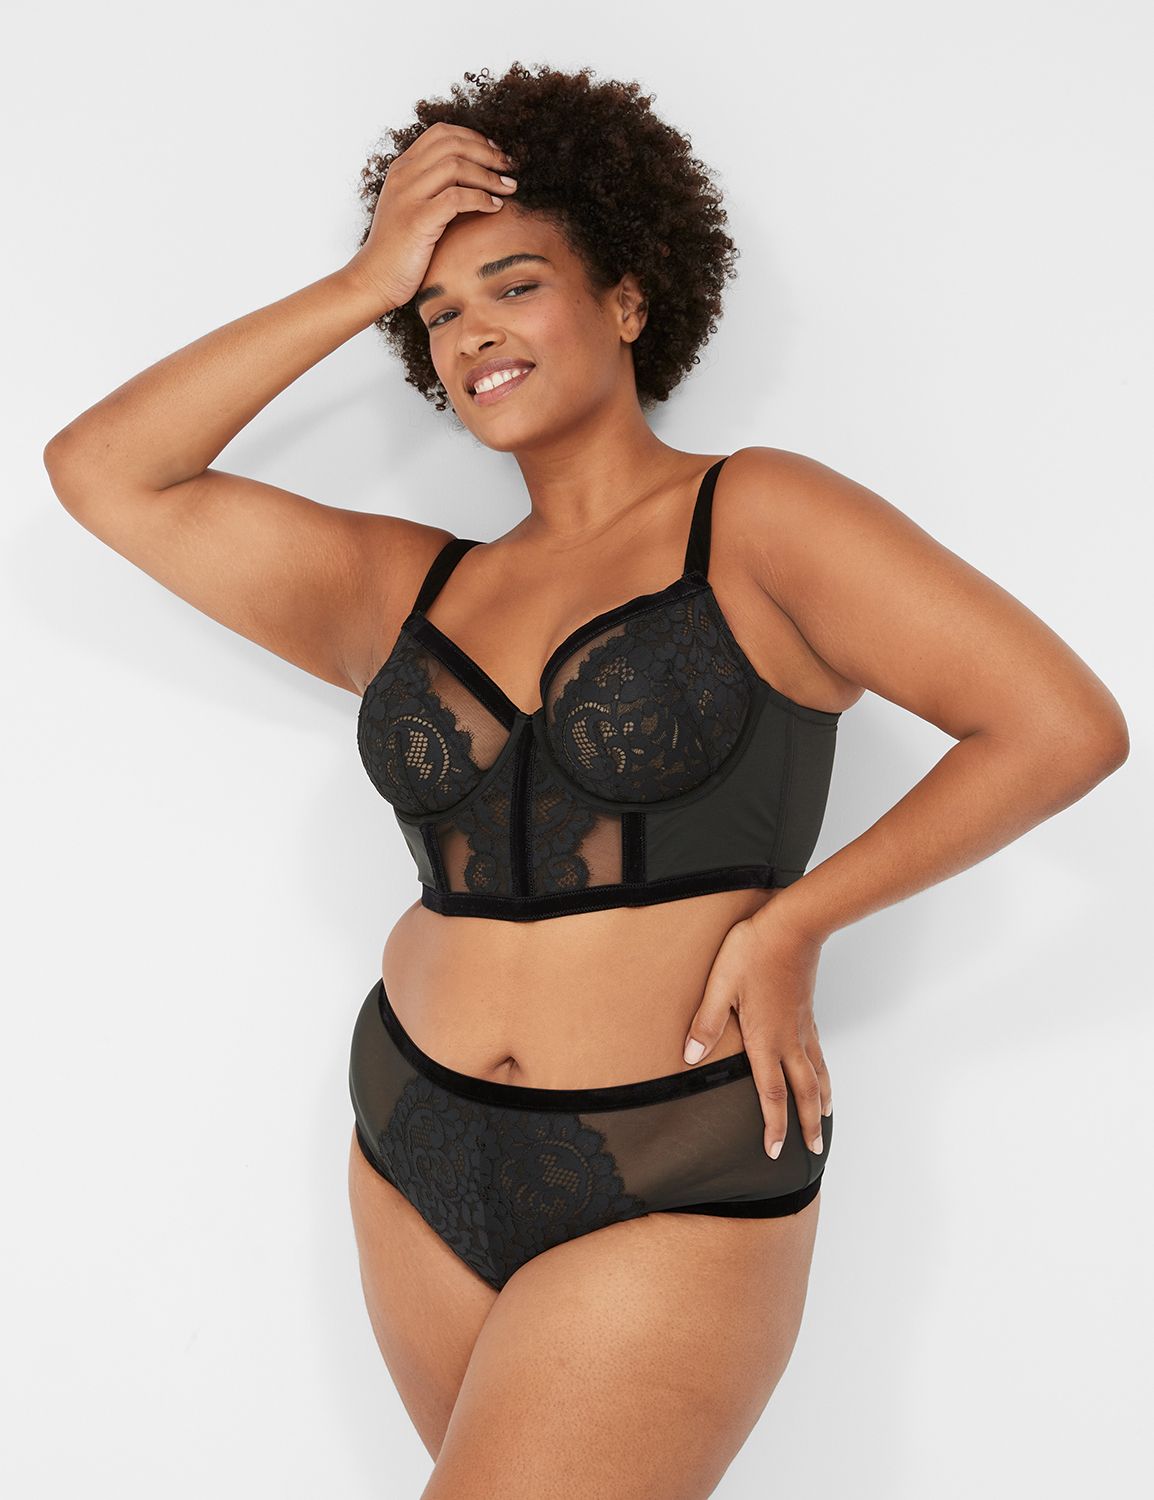 Lane Bryant - We recommend spending every Sunday in a silky-smooth  Seriously Sexy set 😉 Grab a Seriously Sexy bra + panty combo (like this  one) for only $49. 💜 Shop